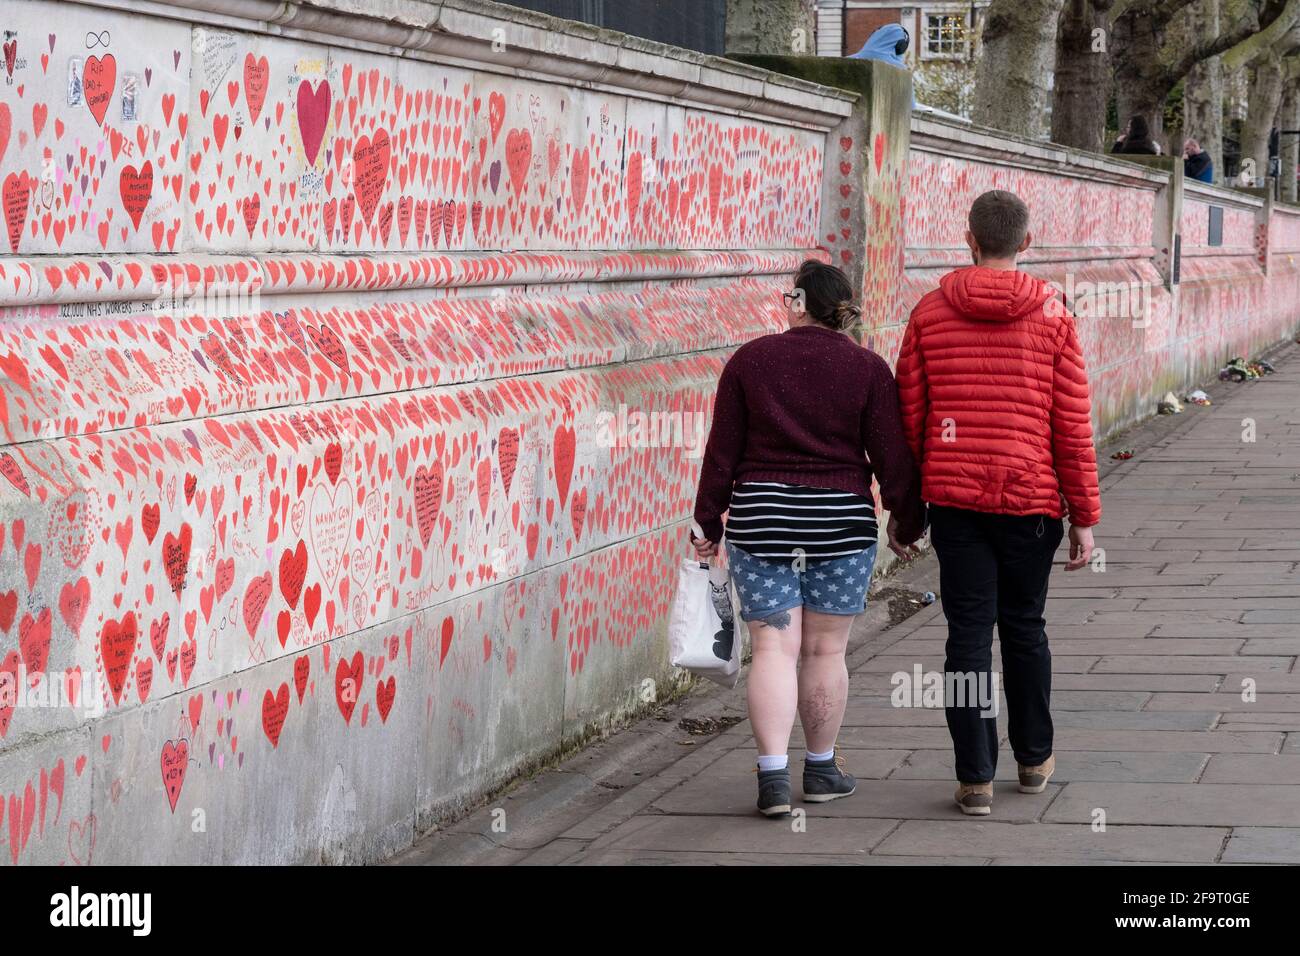 Red hearts painted in memory of people who have died of Covid-19 during the coronavirus pandemic at the National Covid Memorial Wall on 13th April 2021 in London, United Kingdom. The wall is  a place for people to come to reflect or to write messages or the names of lost loved ones. The wall represents a tribute to the approximately 150,000 British victims pandemic. Stock Photo